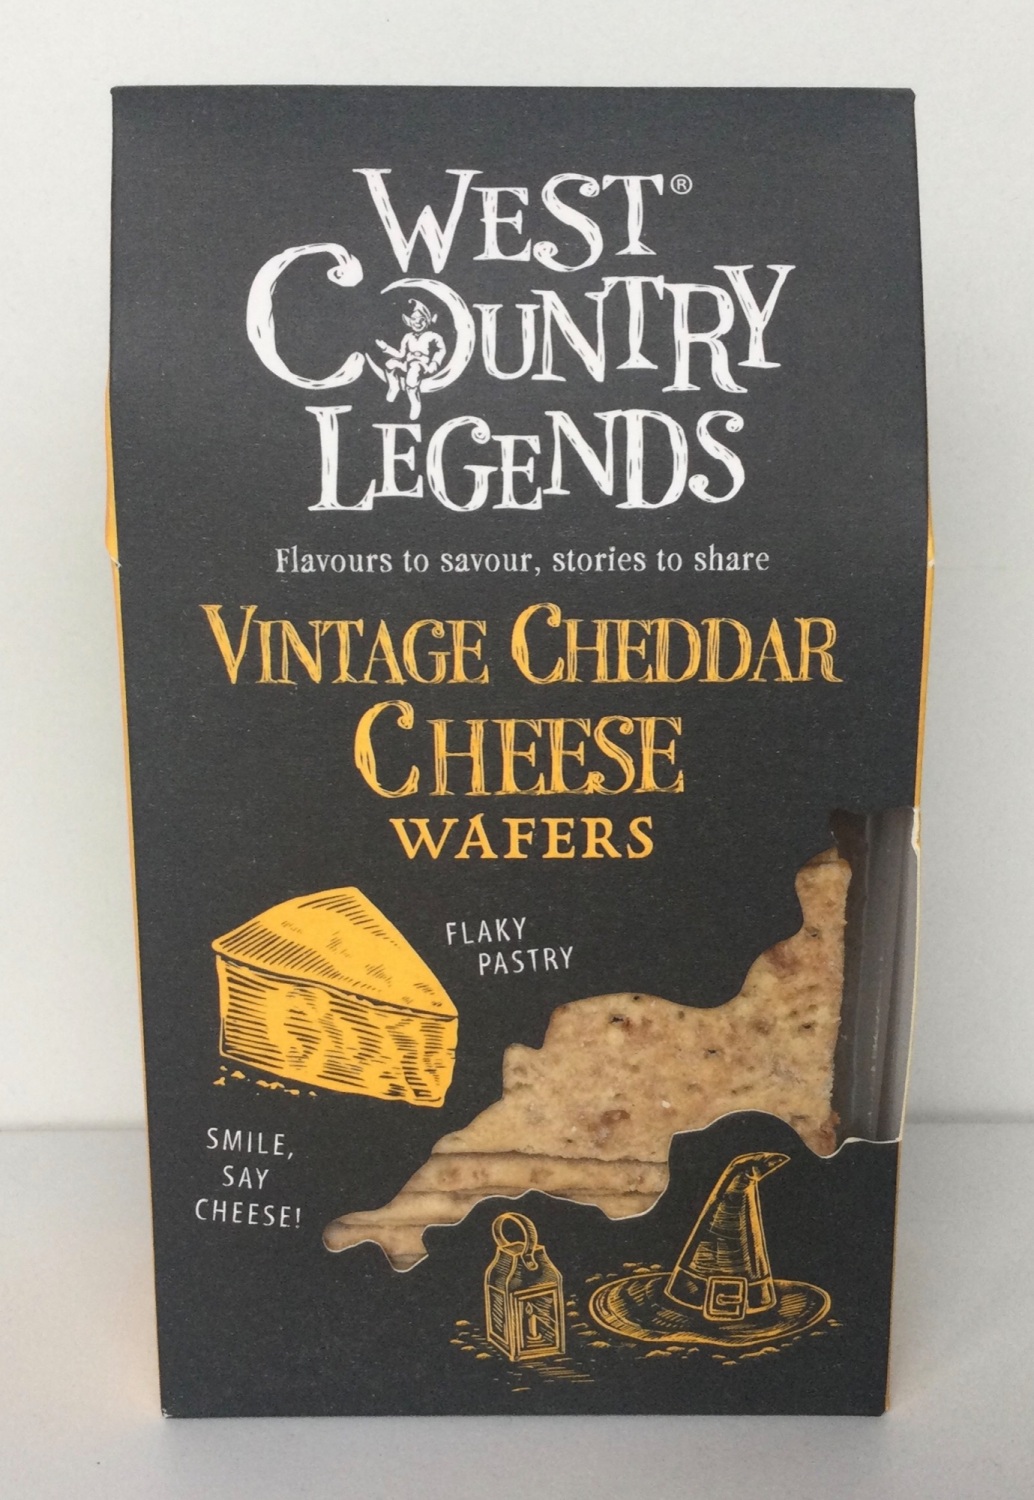 Vintage Cheddar Cheese Wafers